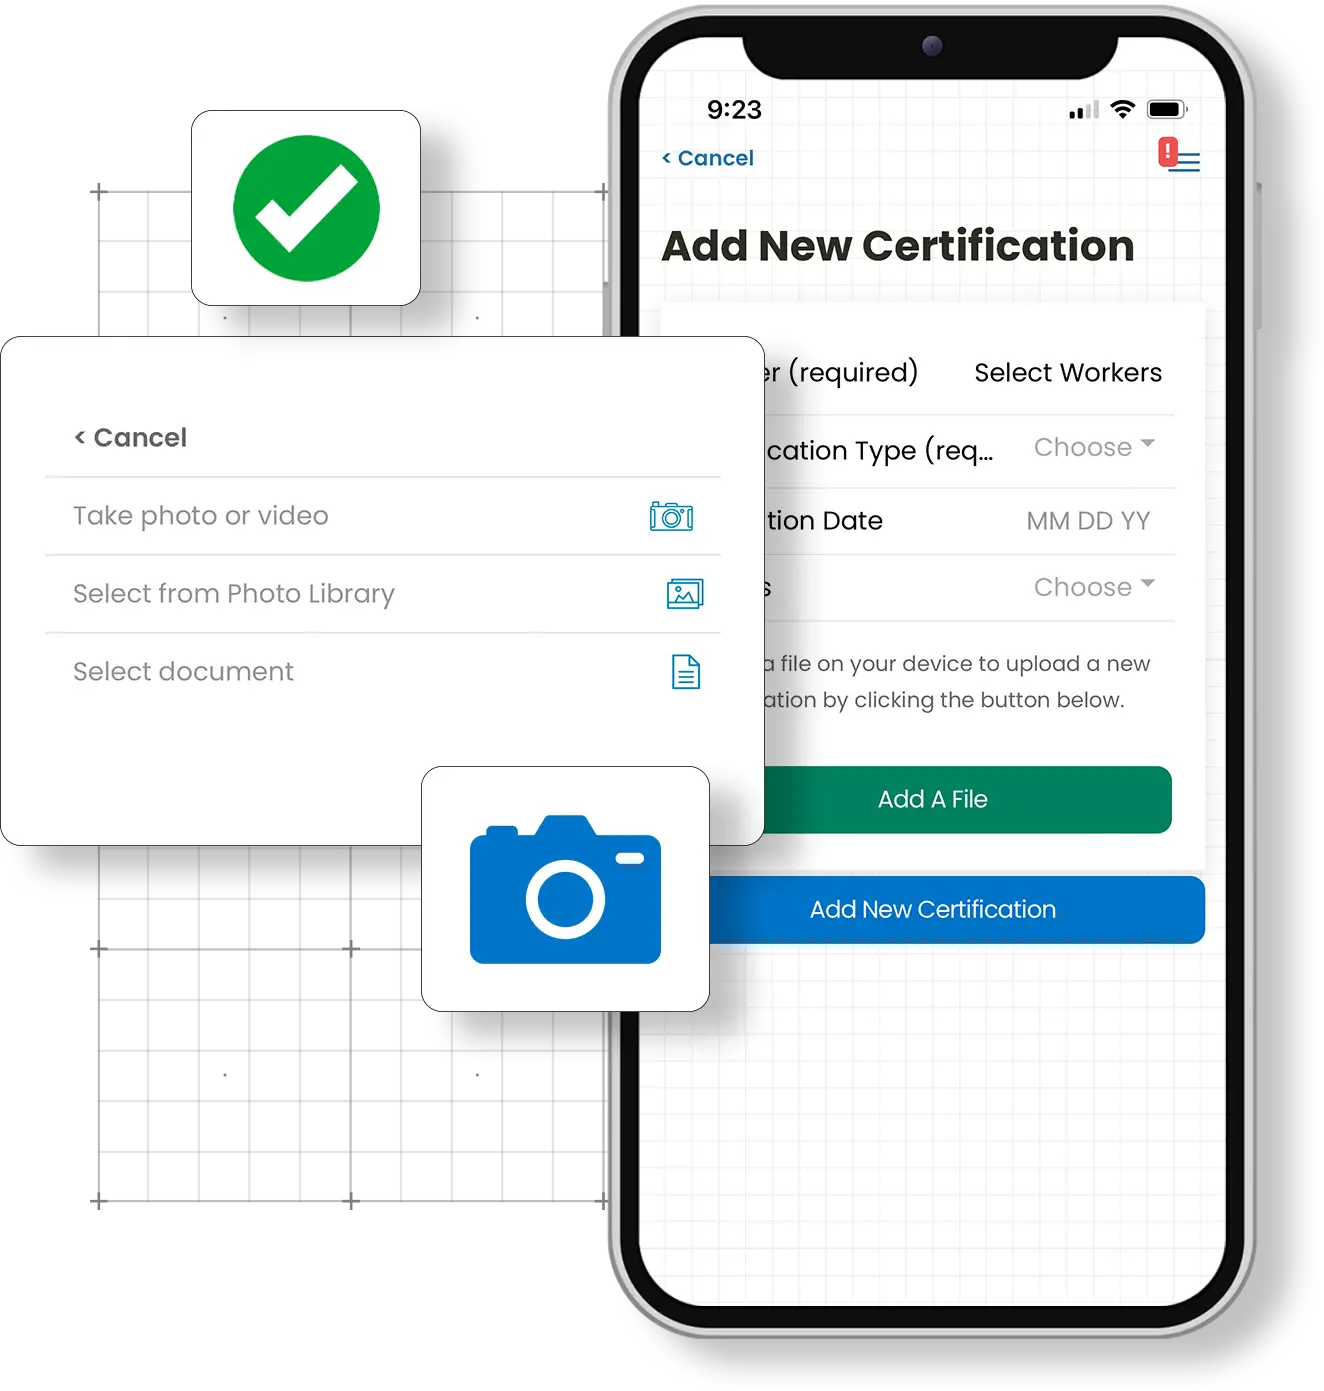 Showing how to upload certificates in the Corfix construction document management mobile app